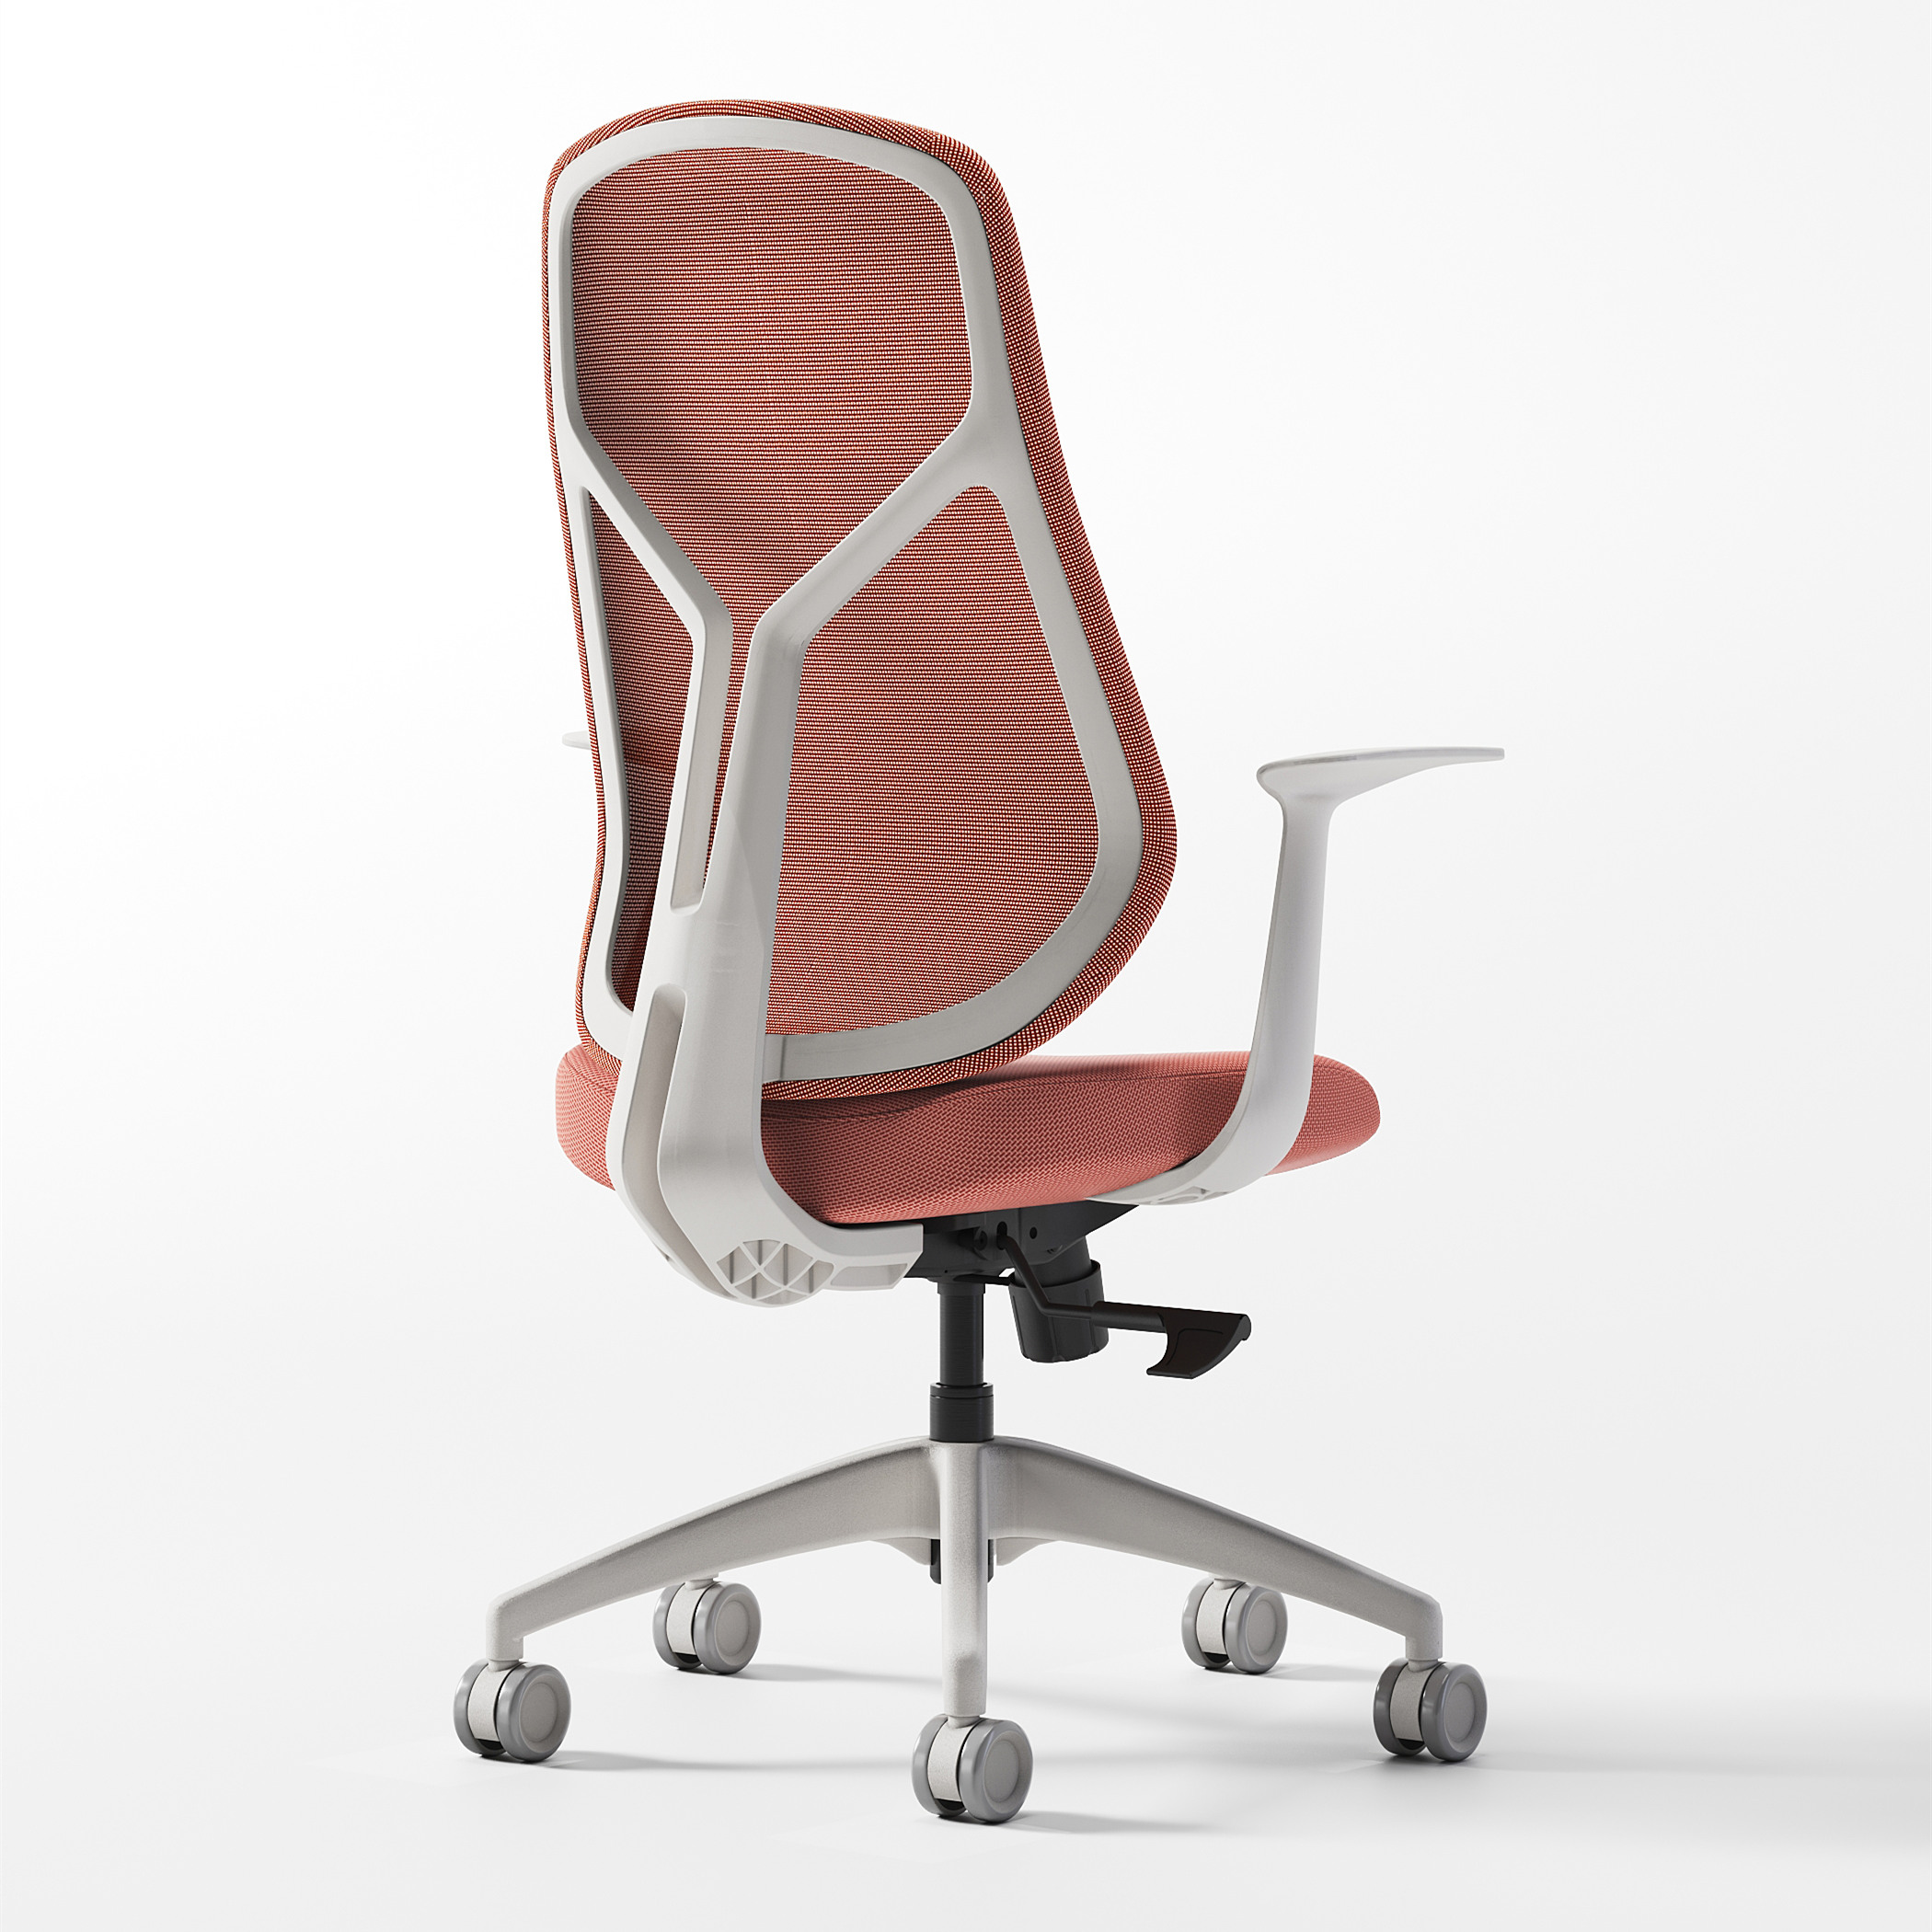 ZUOWE MidBack Red Fabric Ergonomic Chair for Office